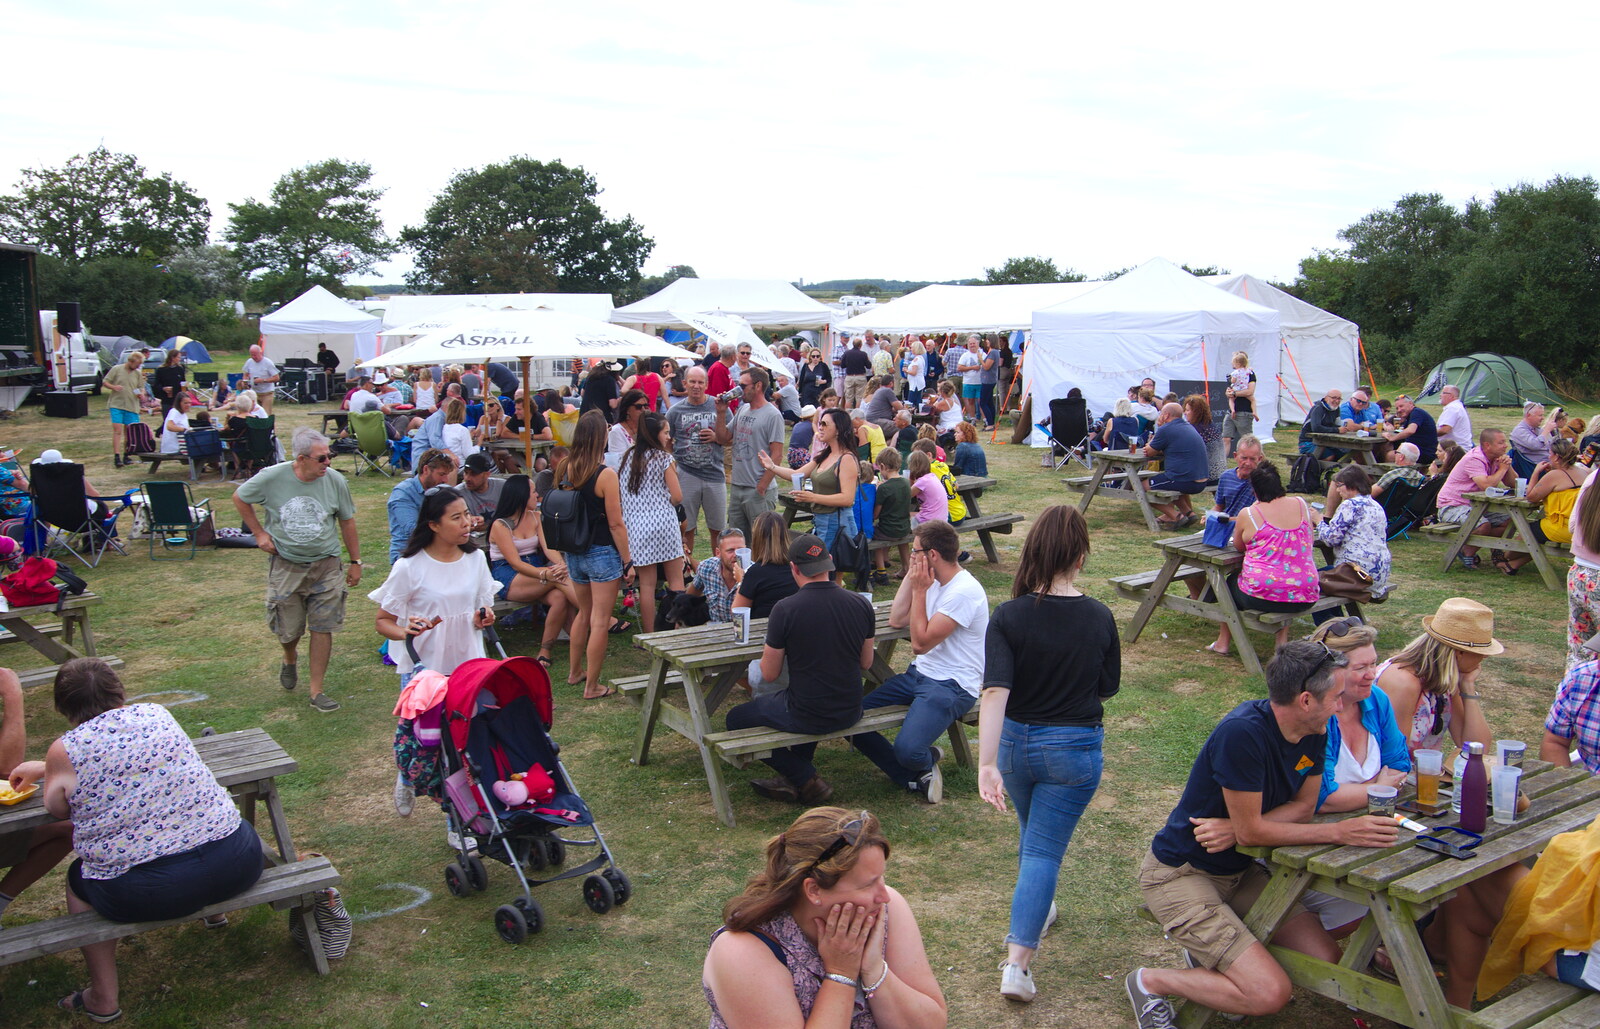 More crowds from Waxham Sands and the Nelson Head Beer Festival, Horsey, Norfolk - 31st August 2019